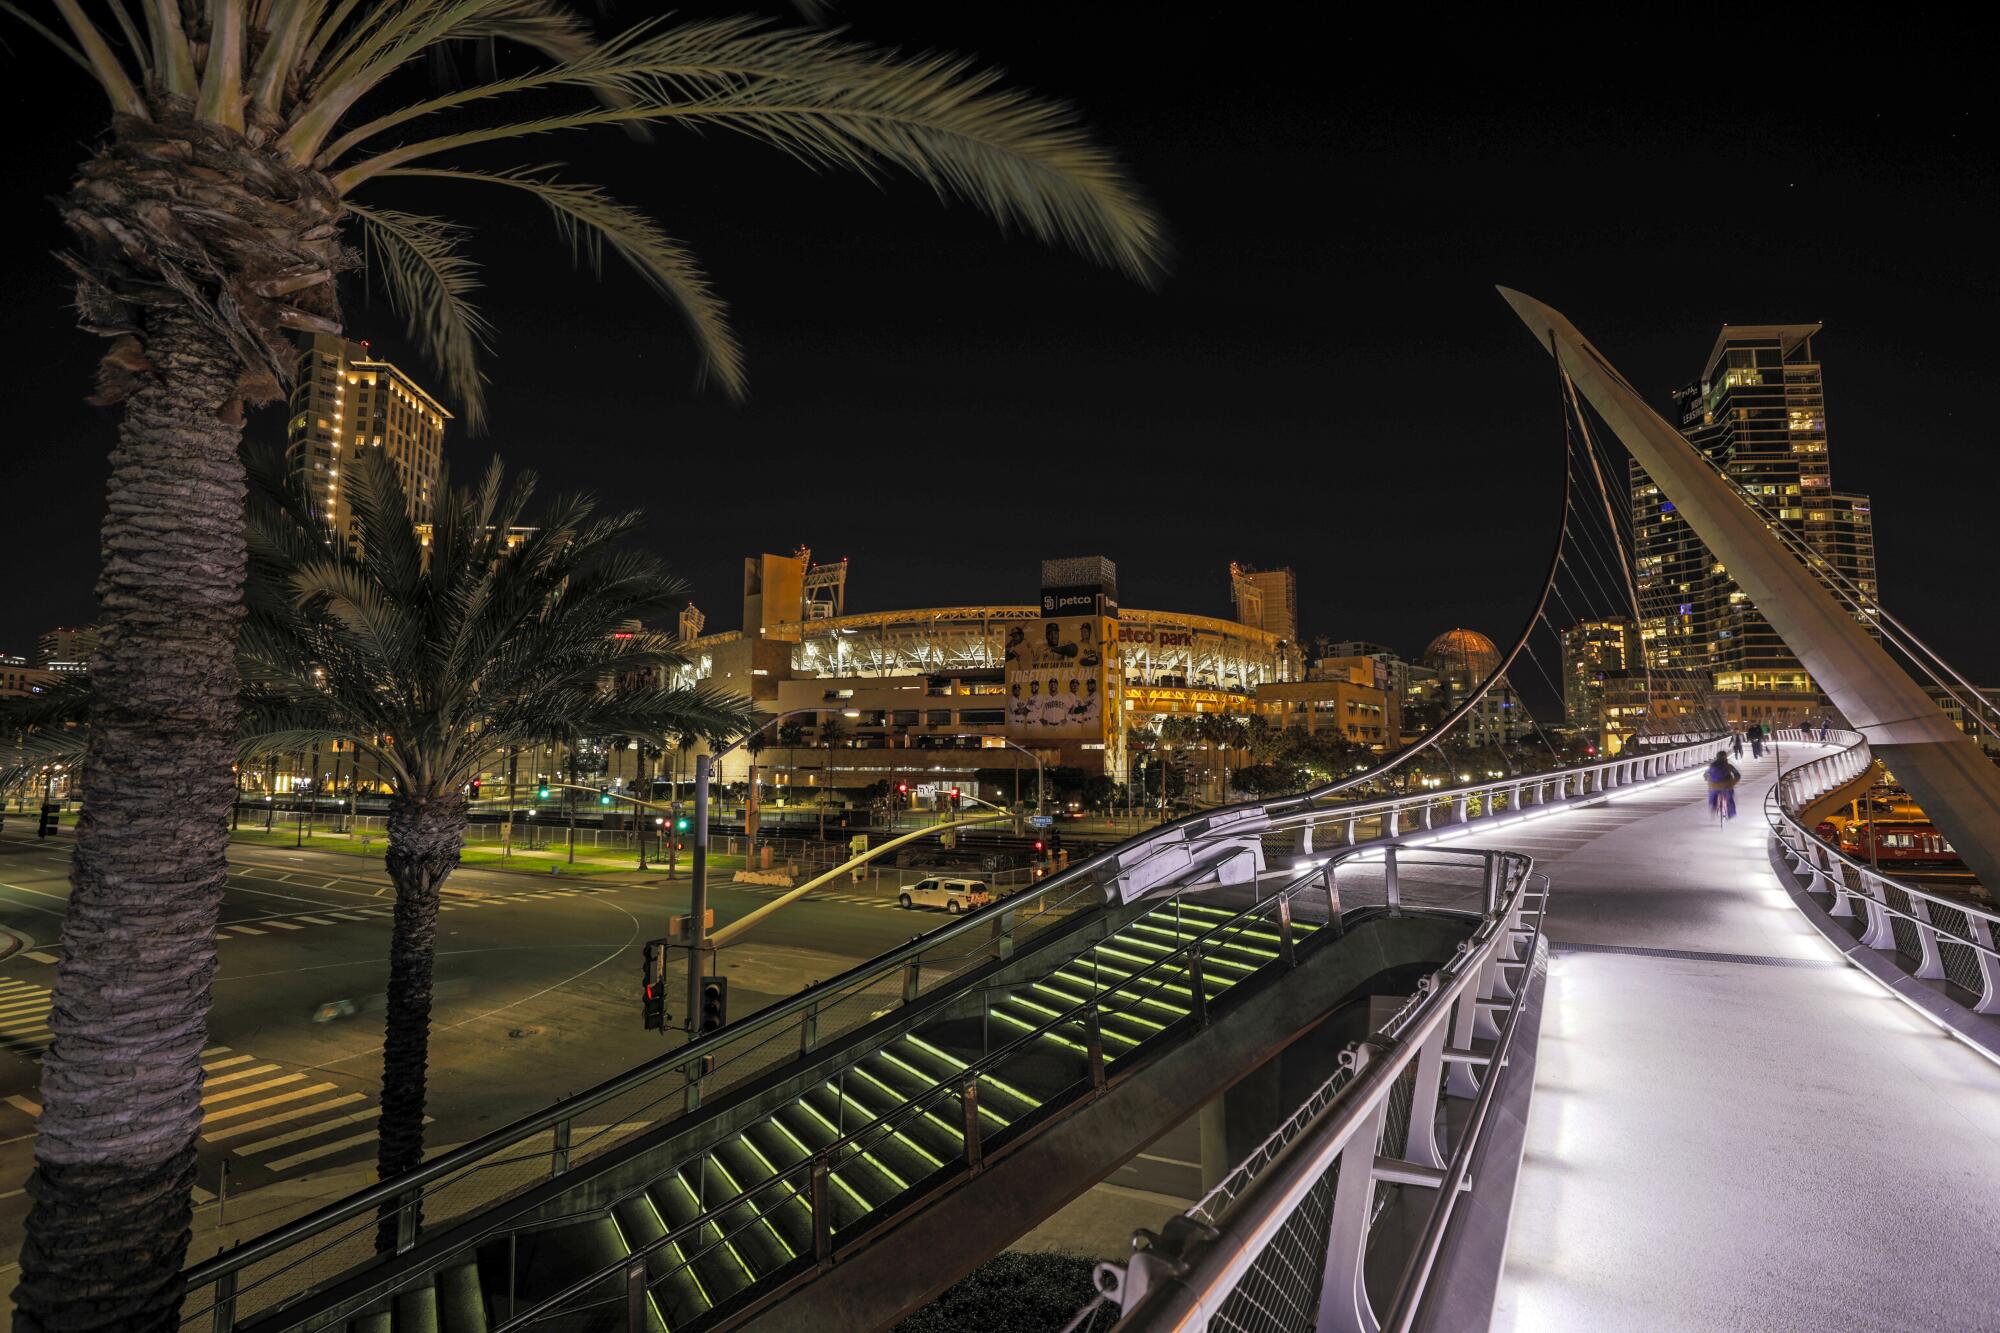 The Harbor Drive pedestrian bridge is seen lighted at night.